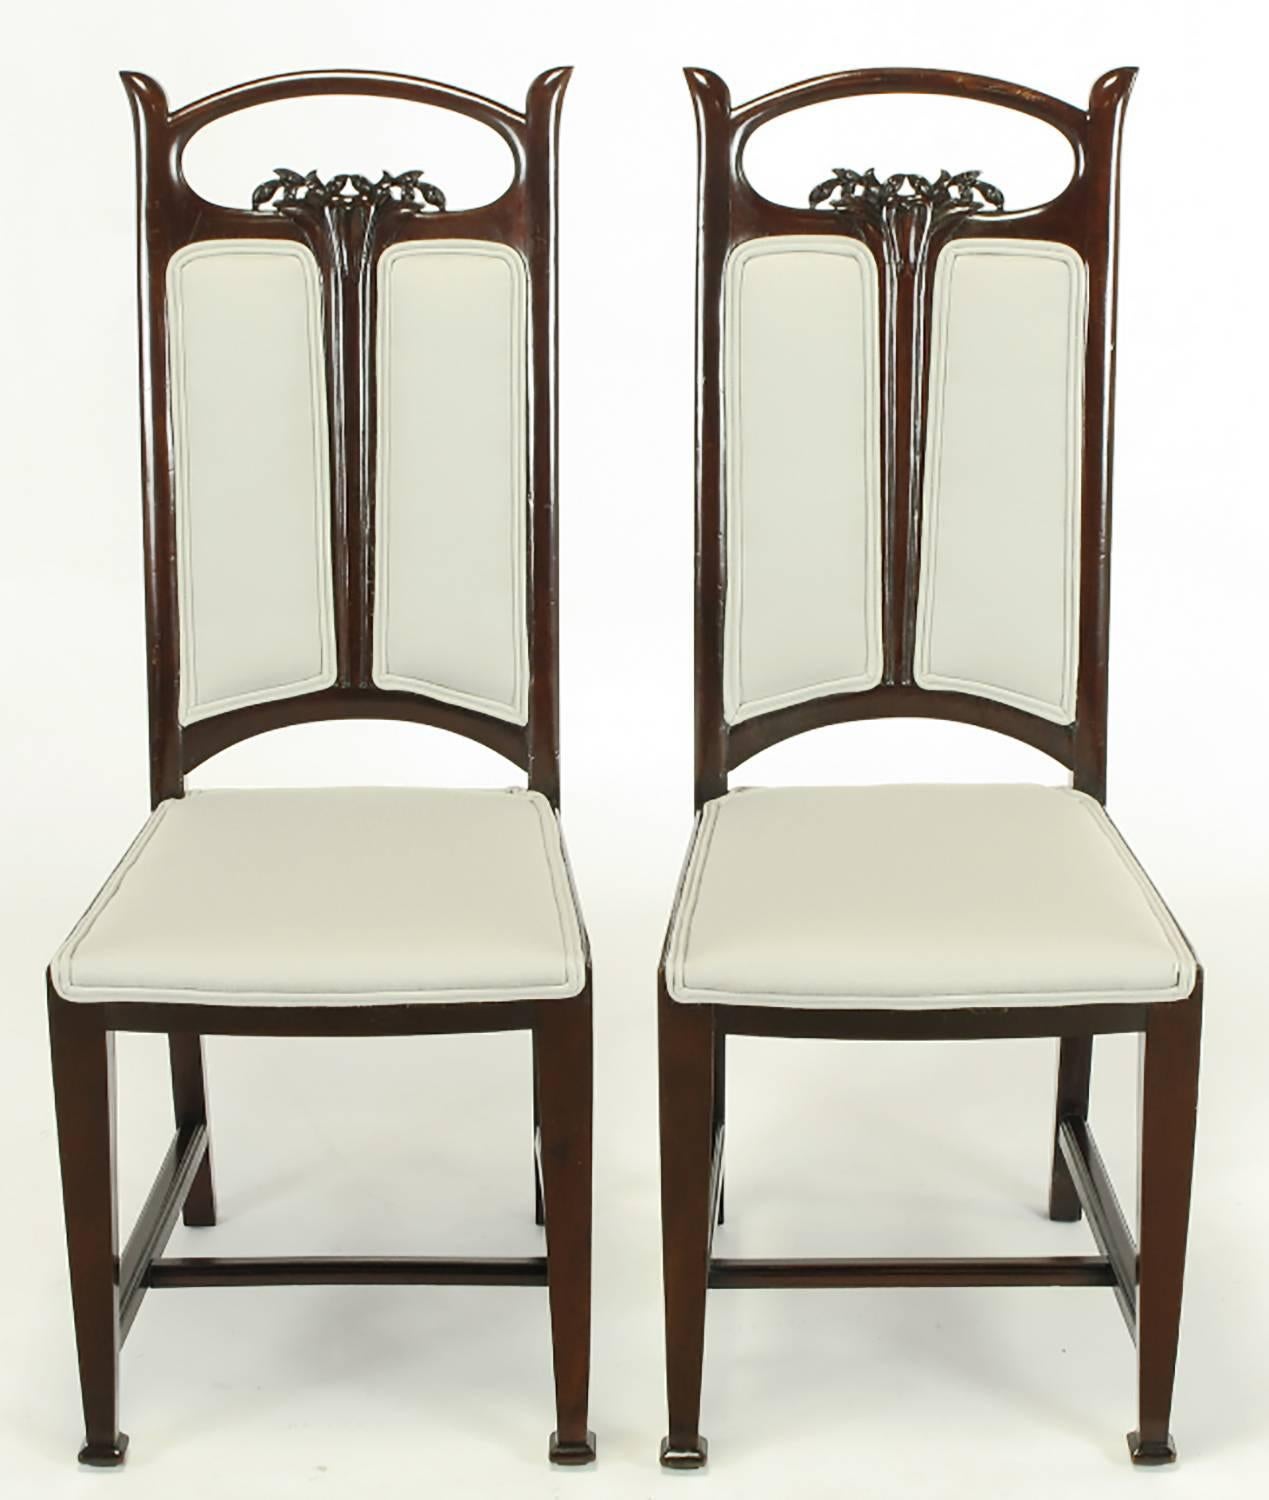 Pair of side chairs with Arts and Crafts and Art Nouveau influences. Mahogany frame with split back and center Art Nouveau carved floral detail and open elliptical top. Arts and crafts inspired legs with carved front feet and H-stretcher with slight